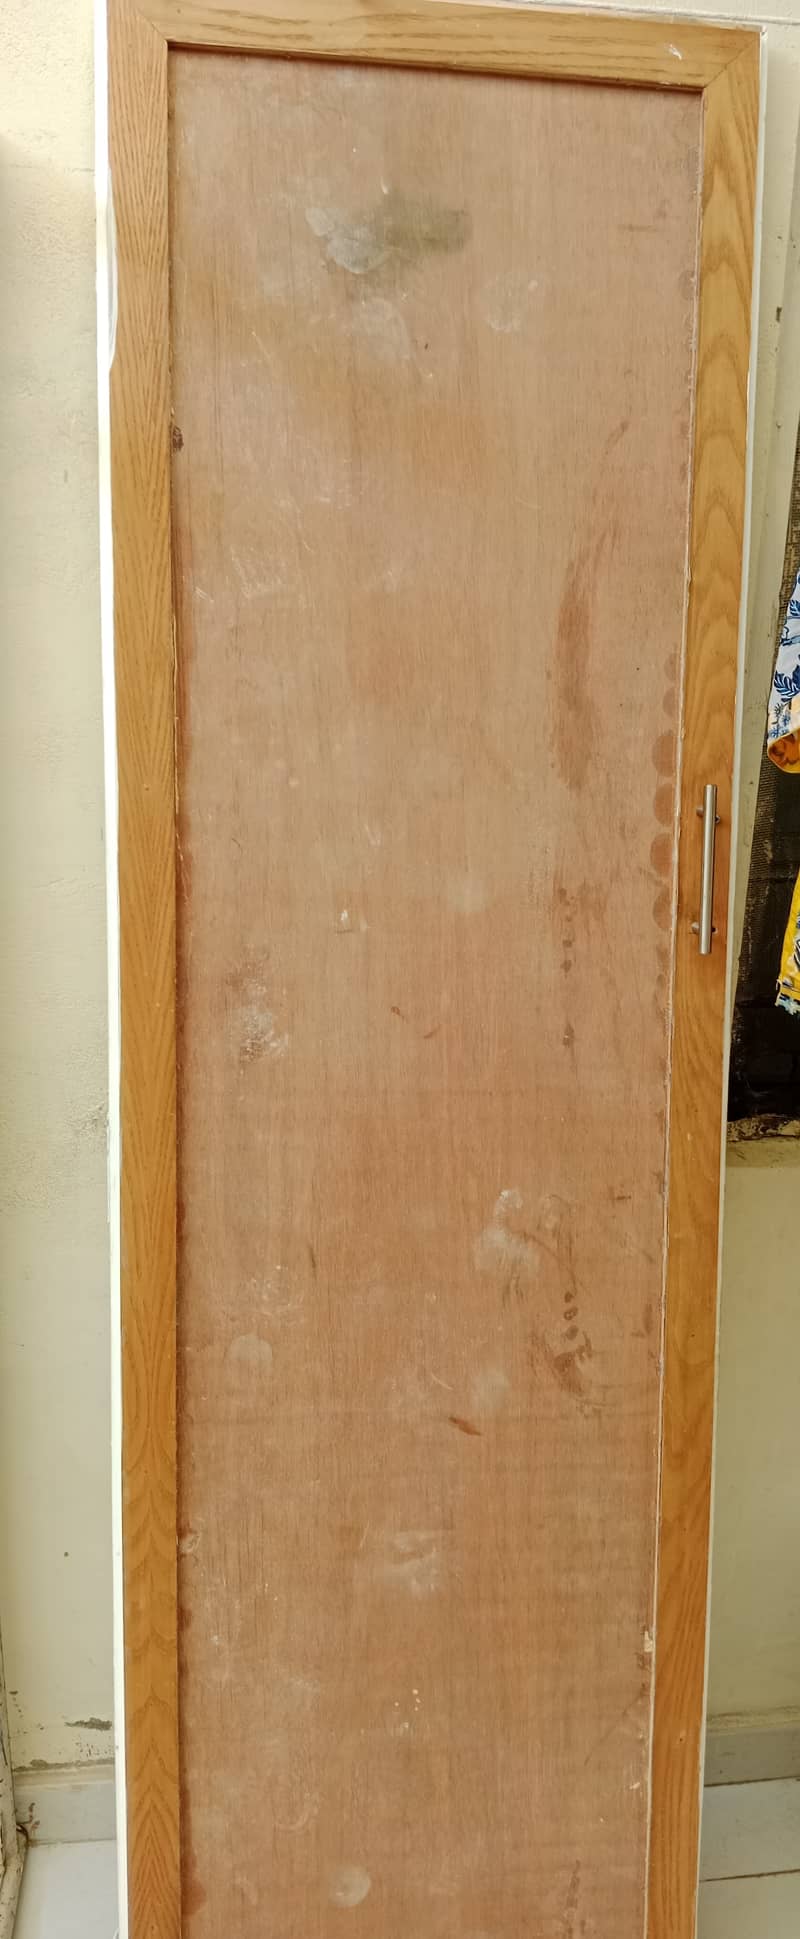 Door for sale neat and clean only WhatsUp 03060103003 6